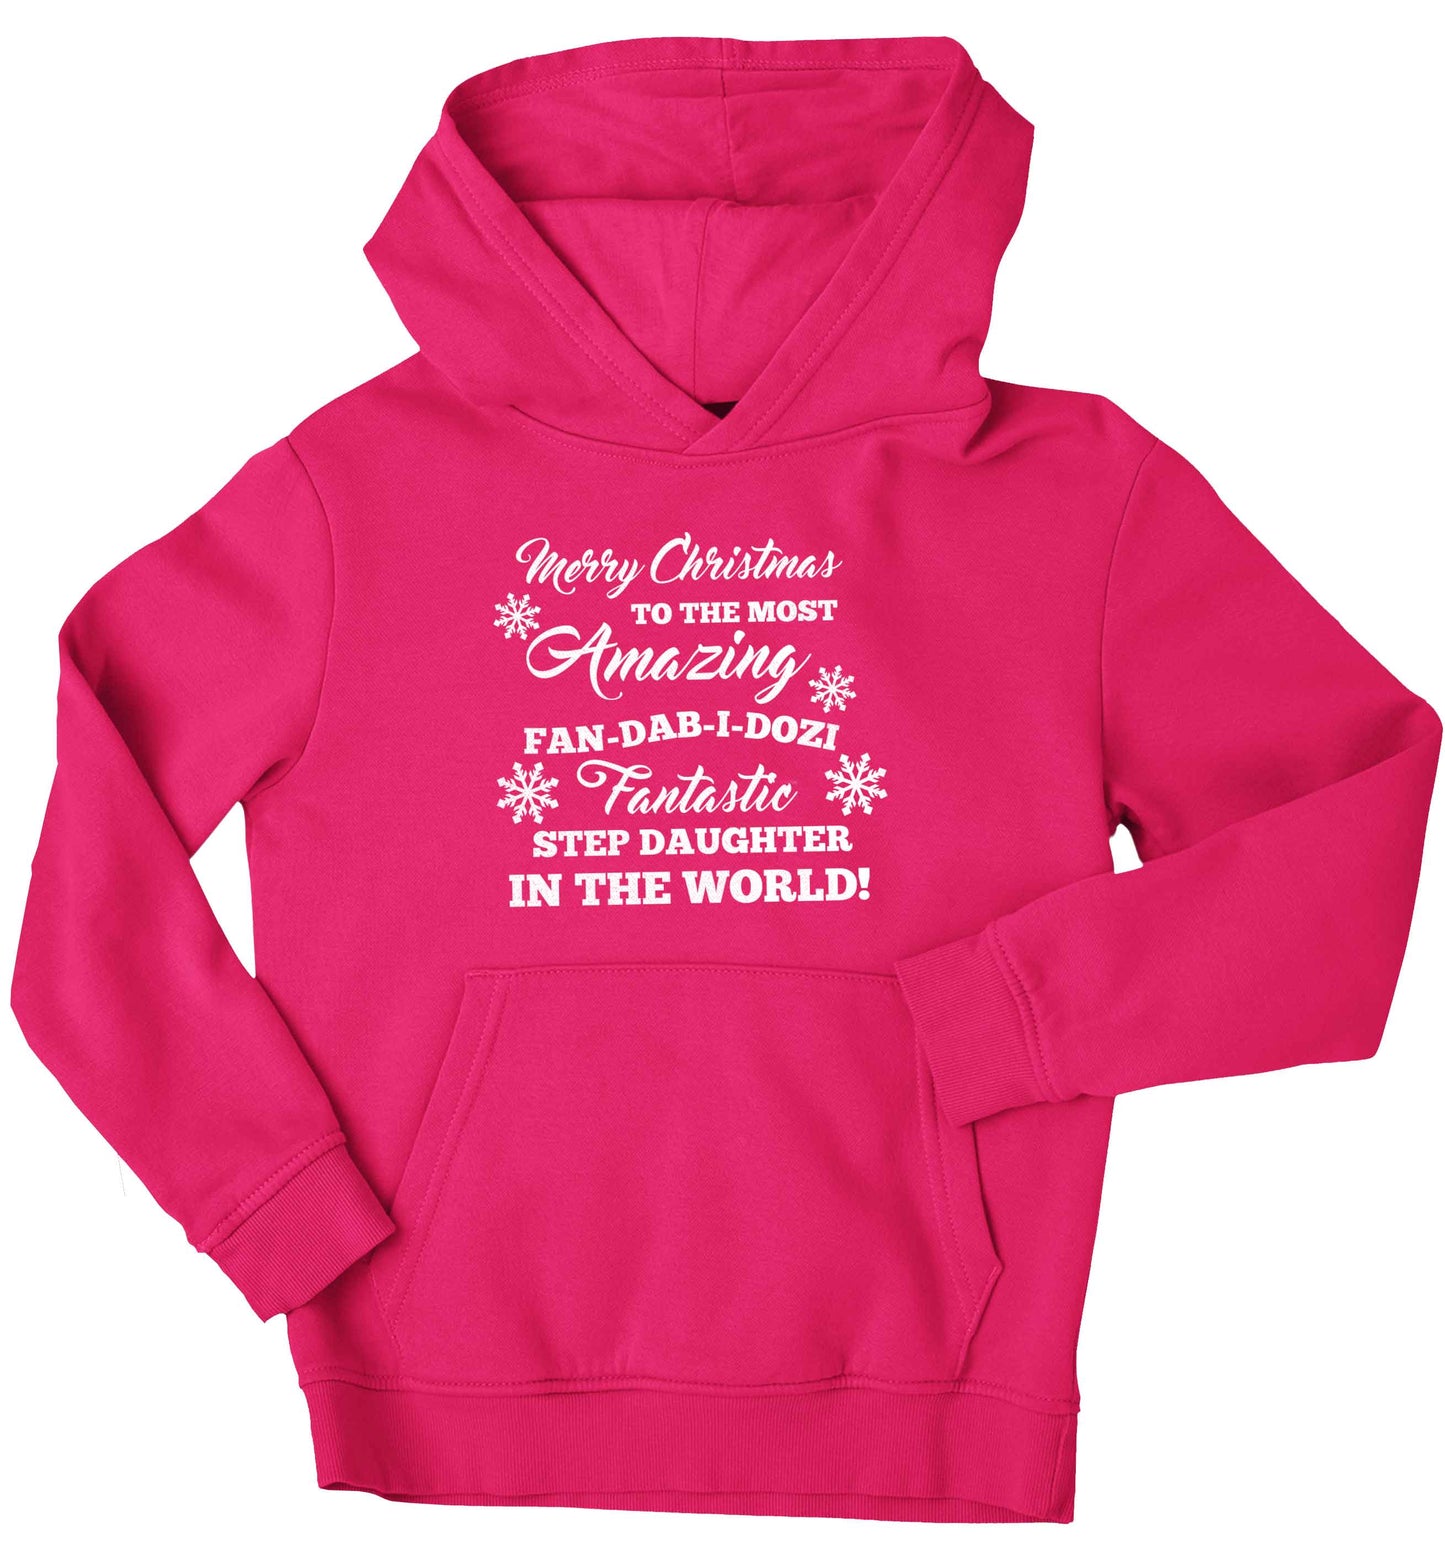 Merry Christmas to the most amazing fan-dab-i-dozi fantasic Step Daughter in the world children's pink hoodie 12-13 Years